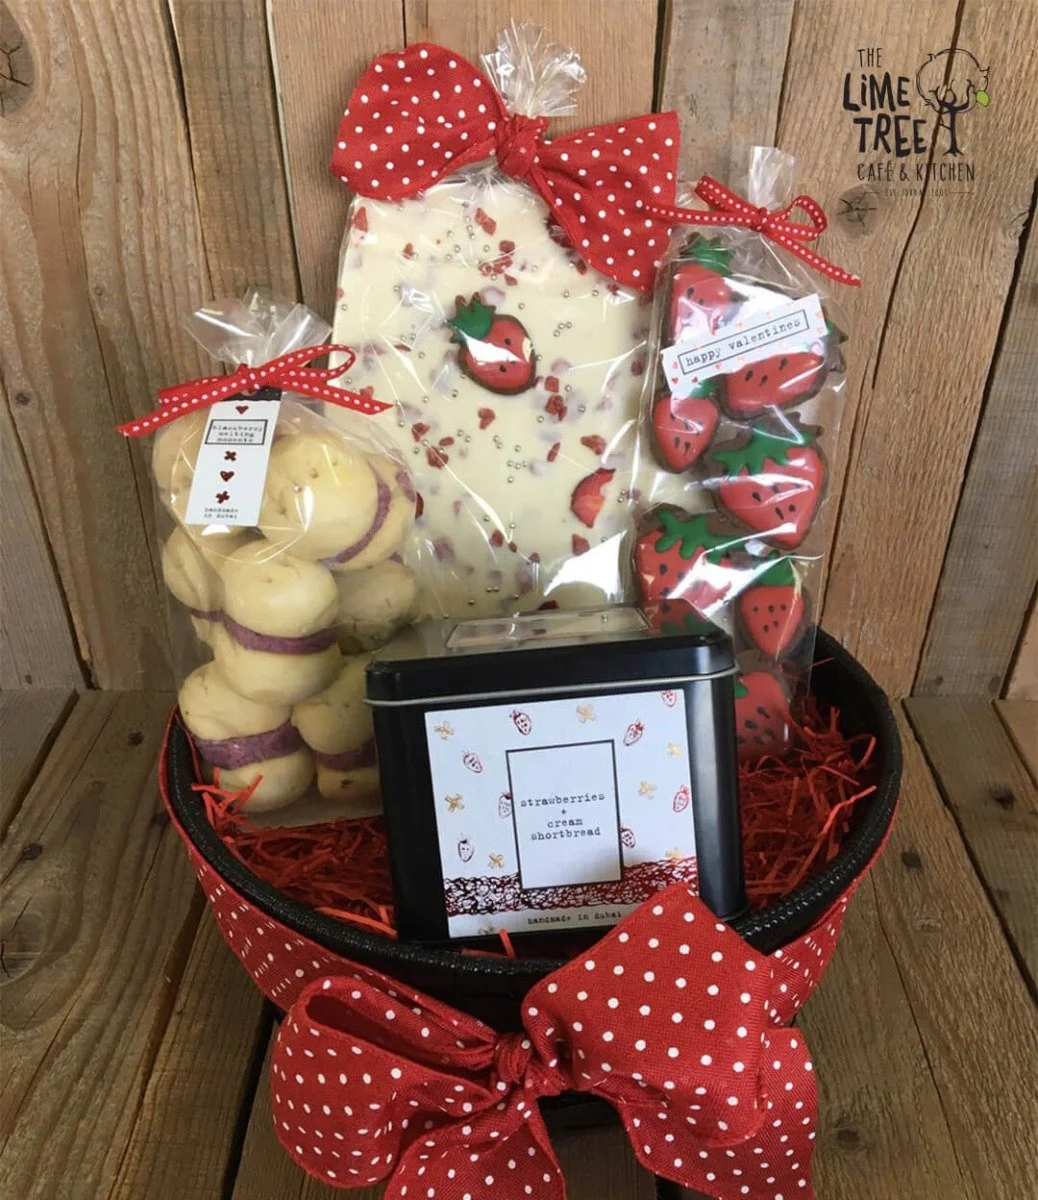 The Strawberry Valentine Basket by Lime Tree Cafe